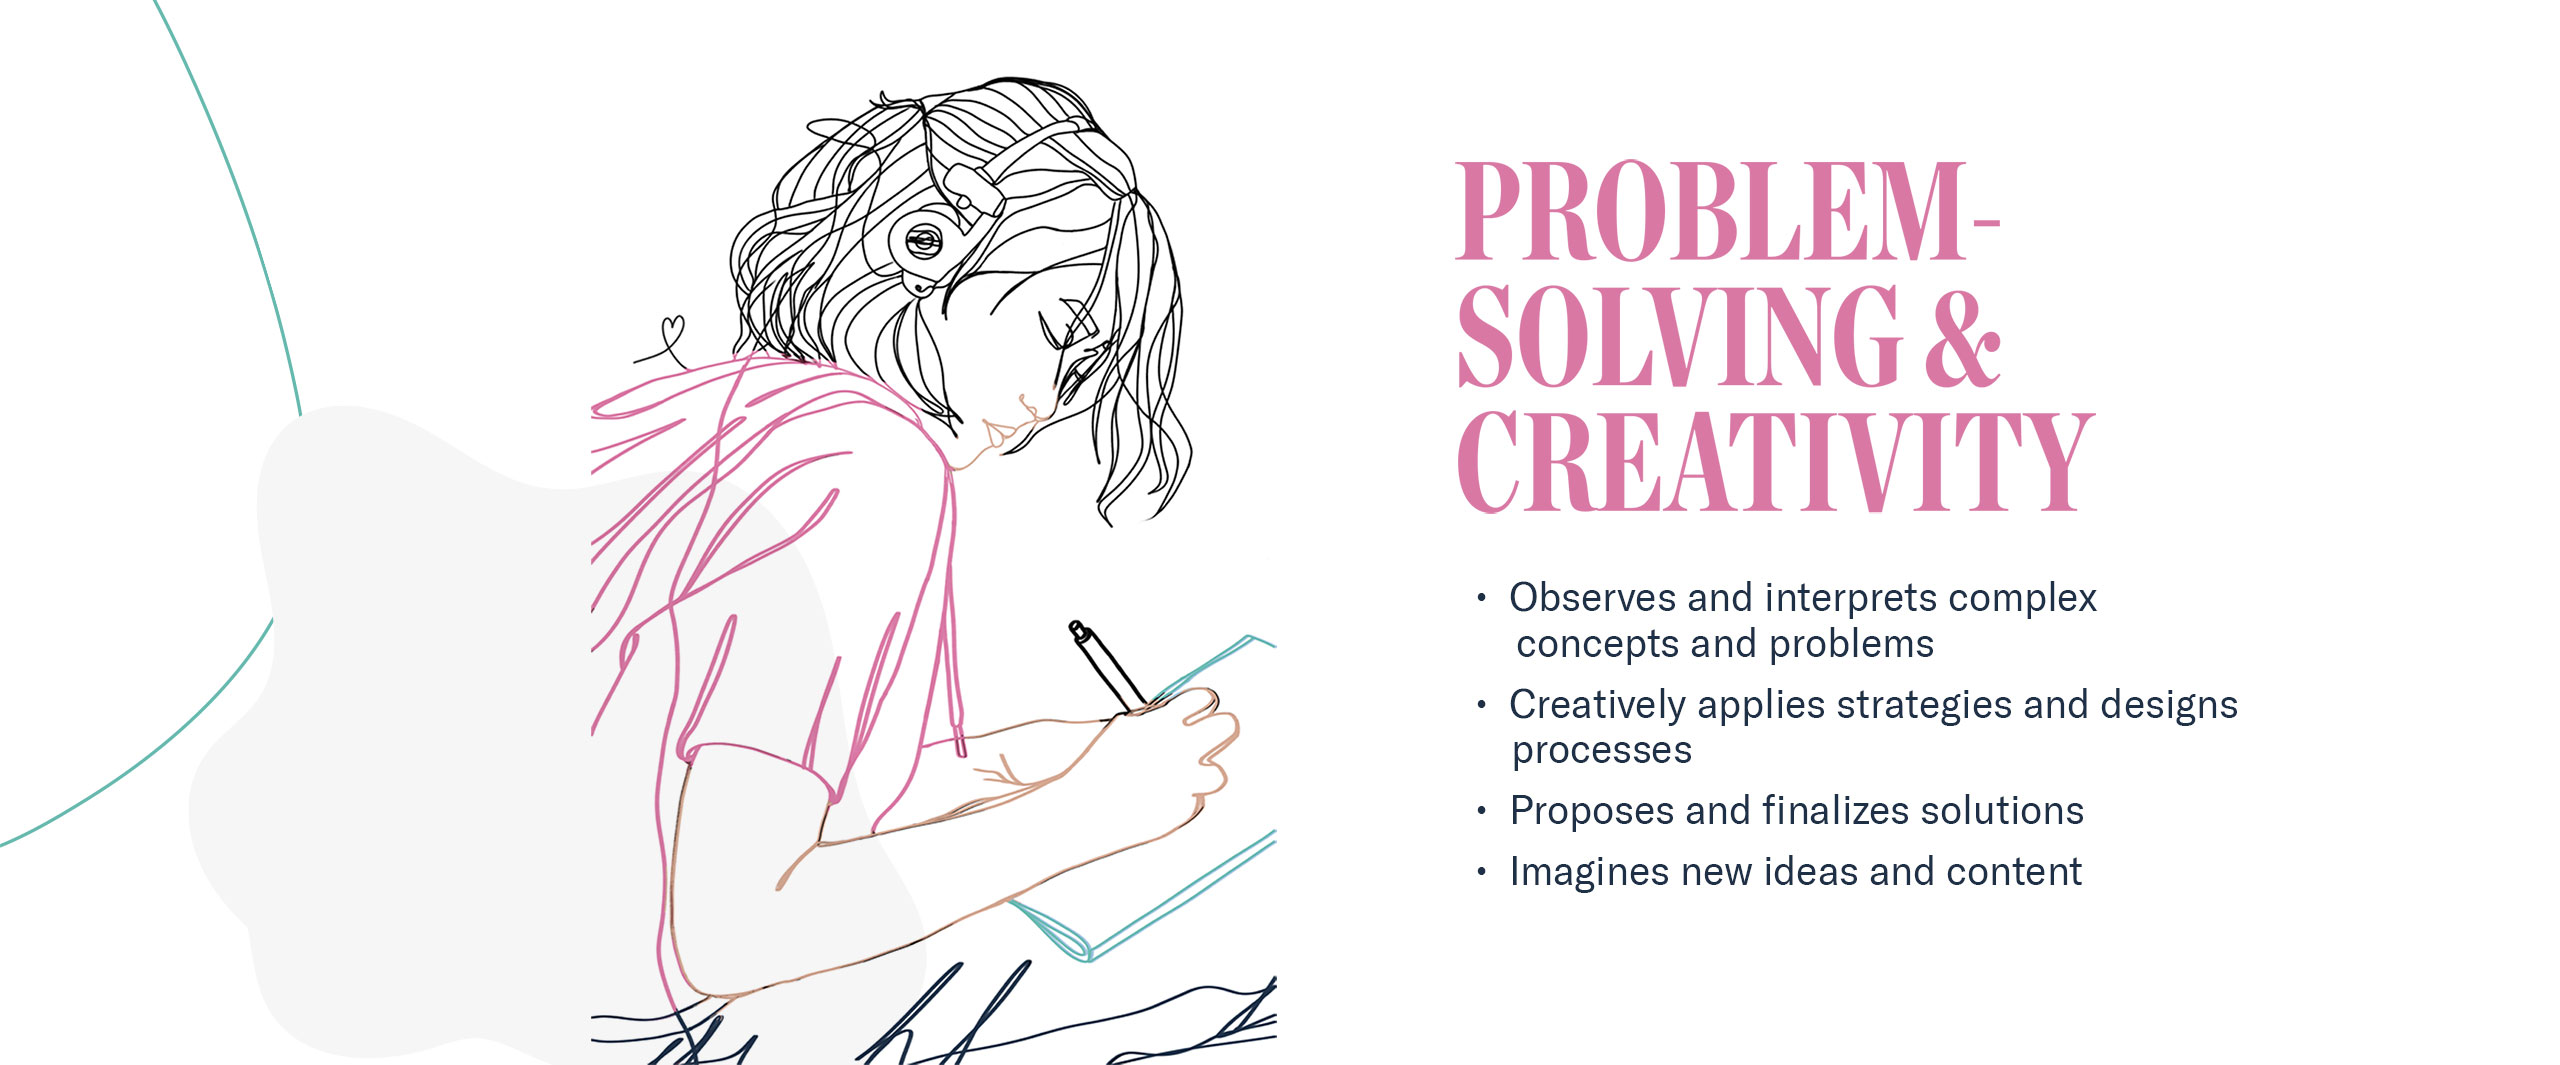 Competency 5: Problem Solving and Creativity